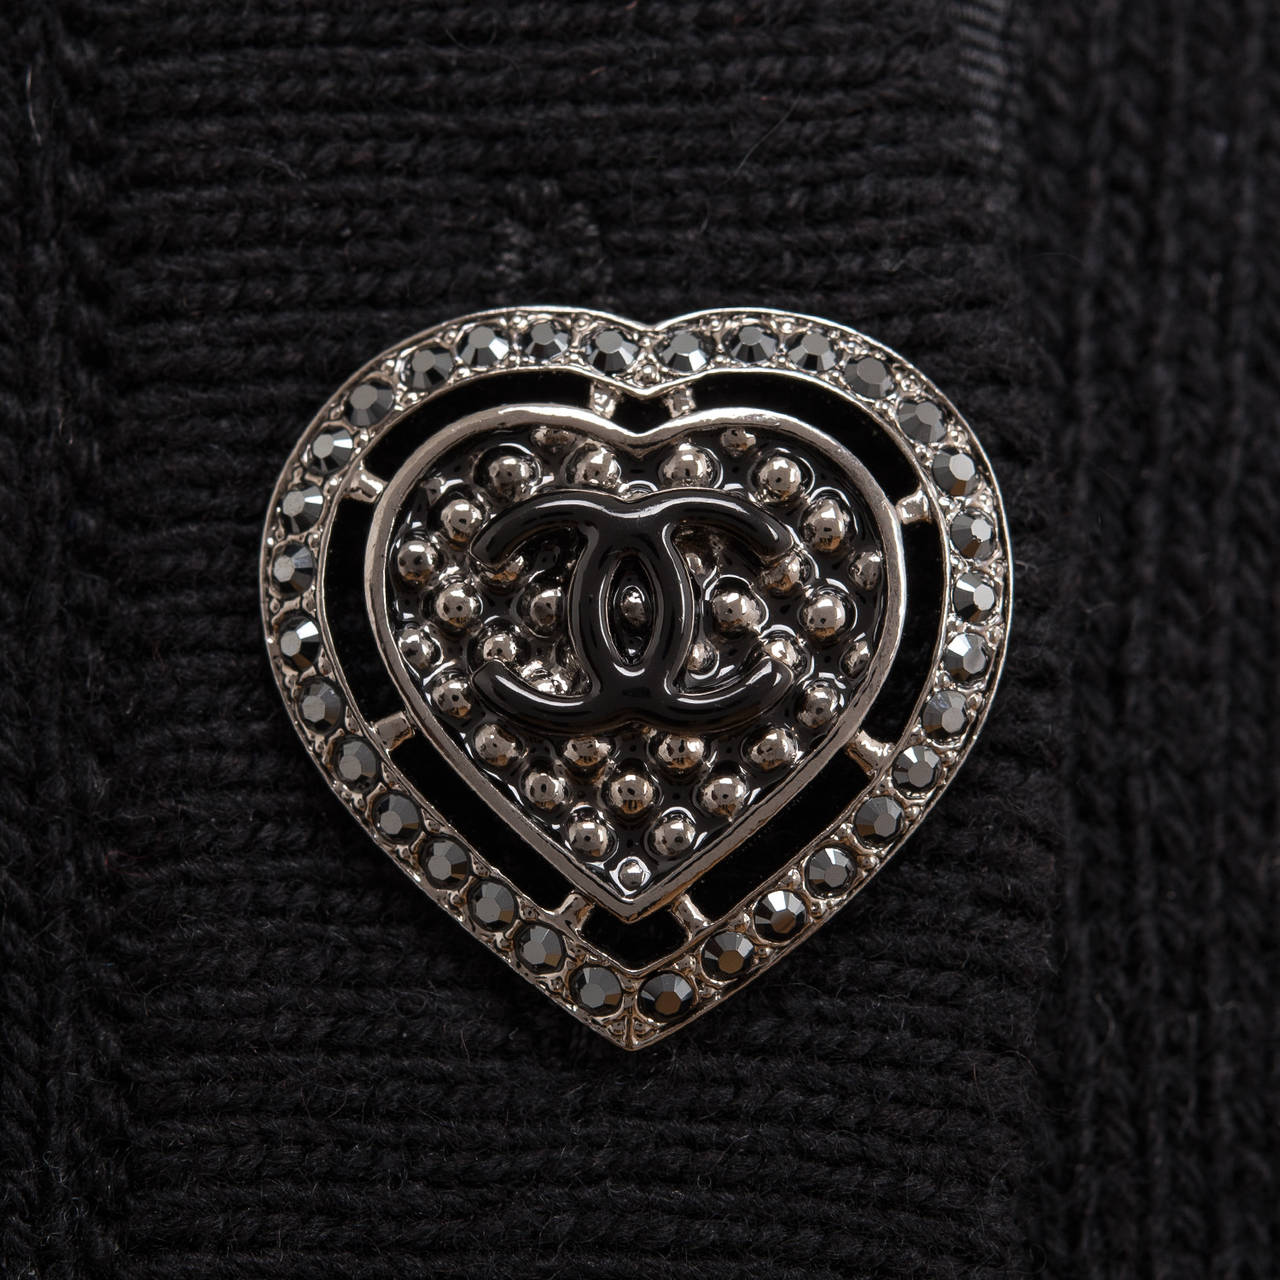 Chanel black cashmere sweater coat with round neckline, six CC-stamped jewel and enamel silver tone heart buttons, hip level patch pockets, bracelet sleeves and vertical ribbed trimming  at pockets, cuff, and bottom.
 
Fabric: 100% cashmere
